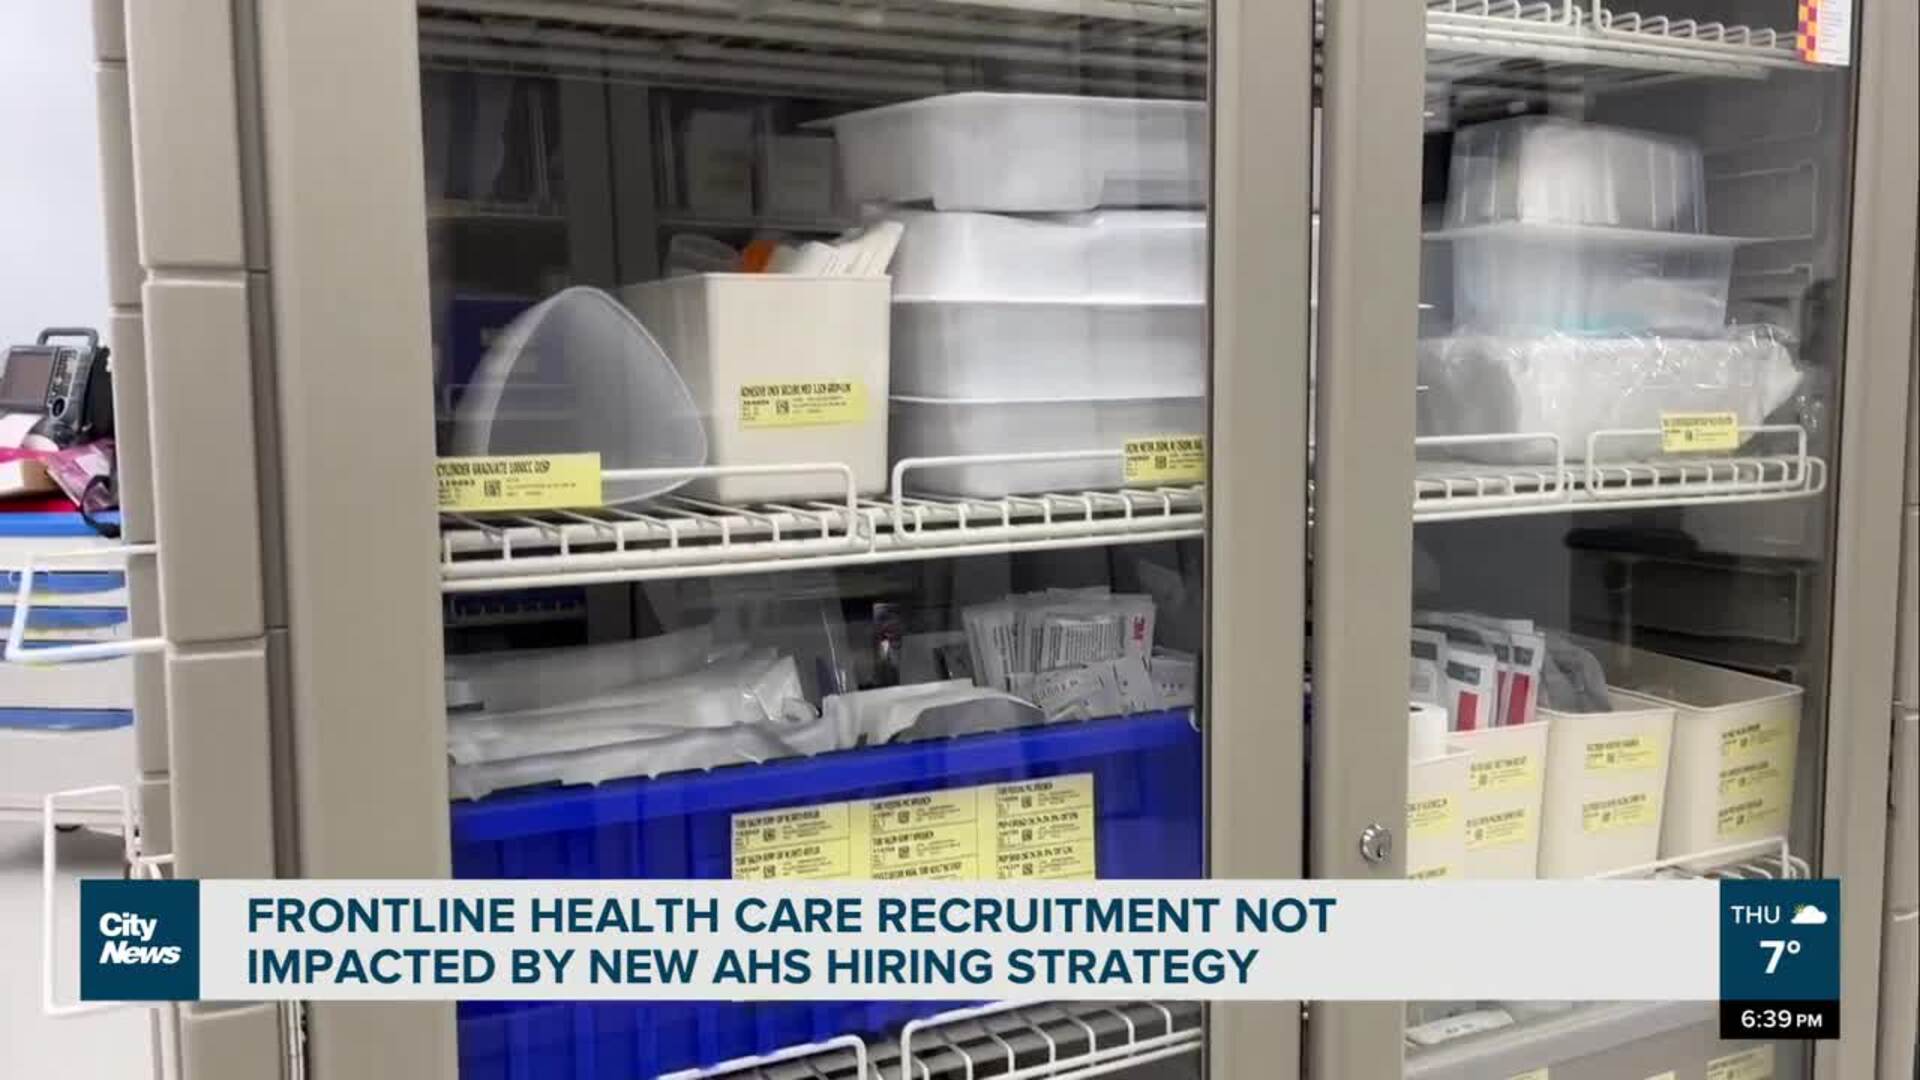 Frontline health care recruitment not impacted by new AHS hiring strategy